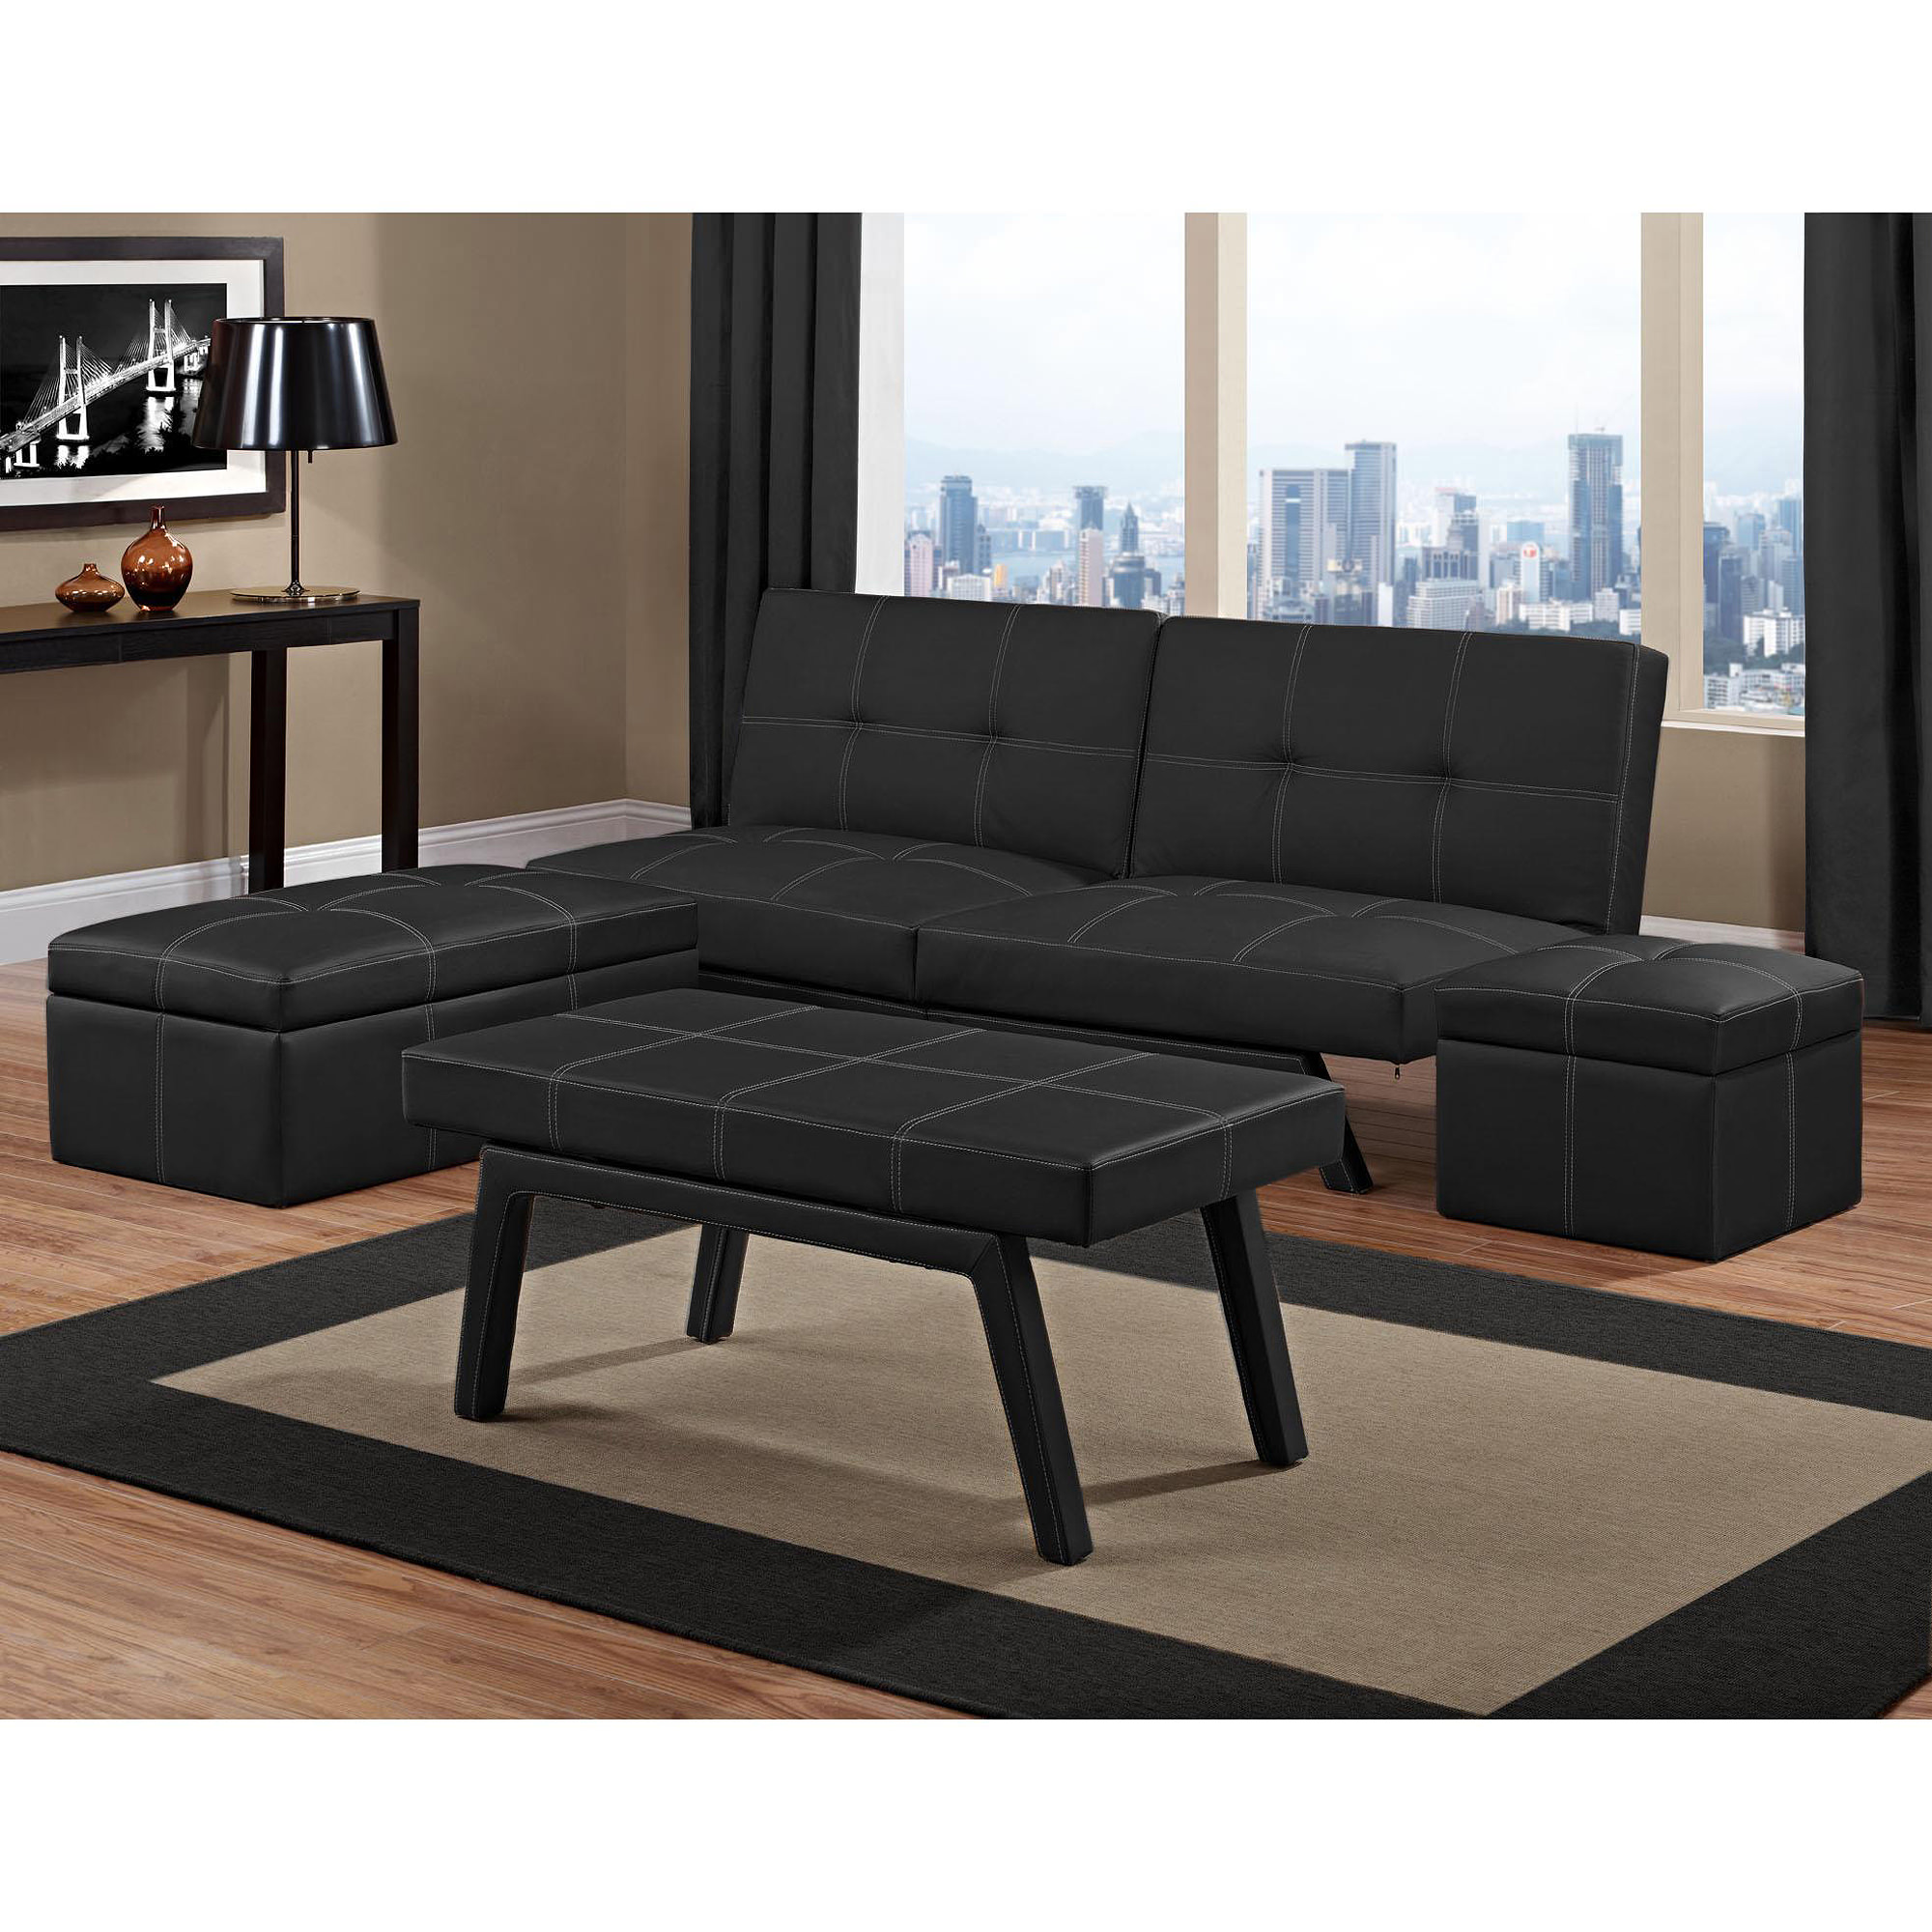 Image of: Couch Vs Loveseat